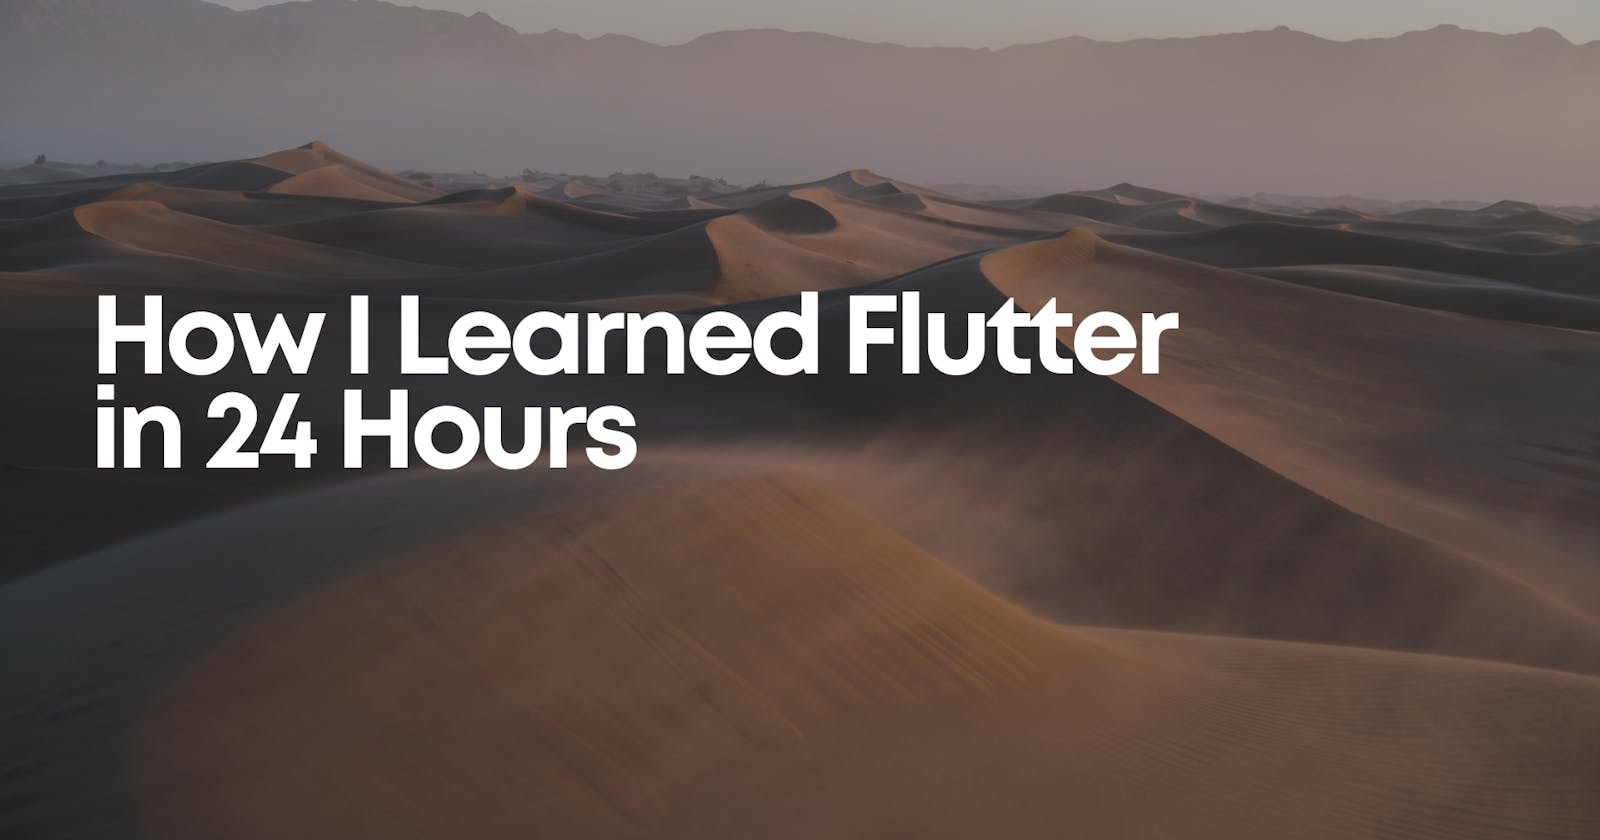 How I Learned Flutter in 24 Hours